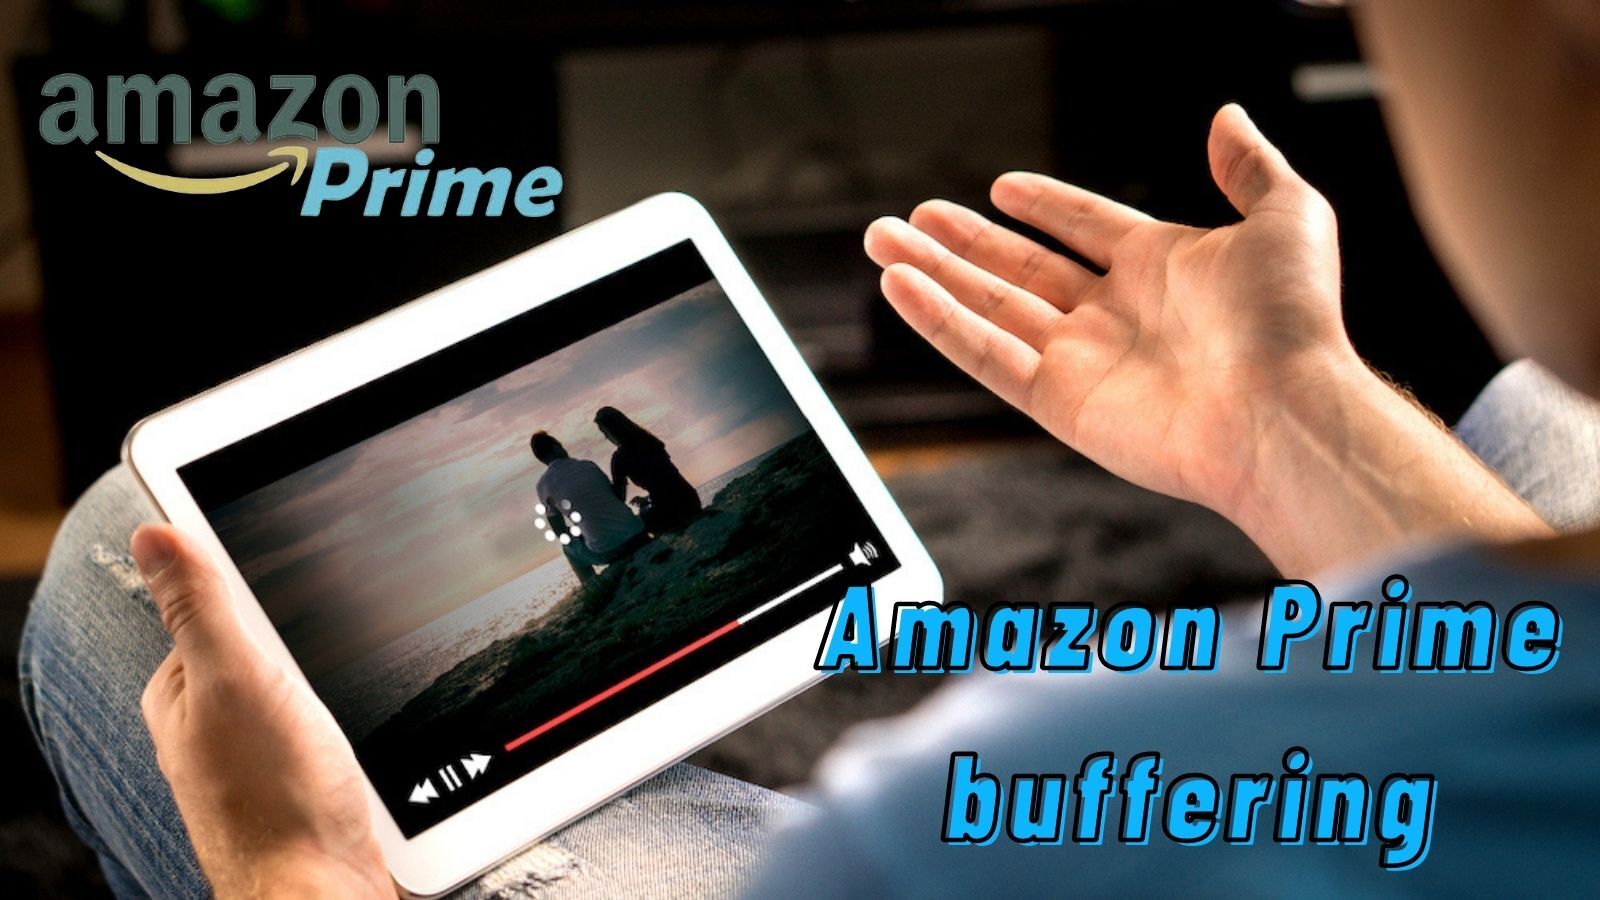 How to Fix Amazon Prime Buffering, Skipping, and Freezing?